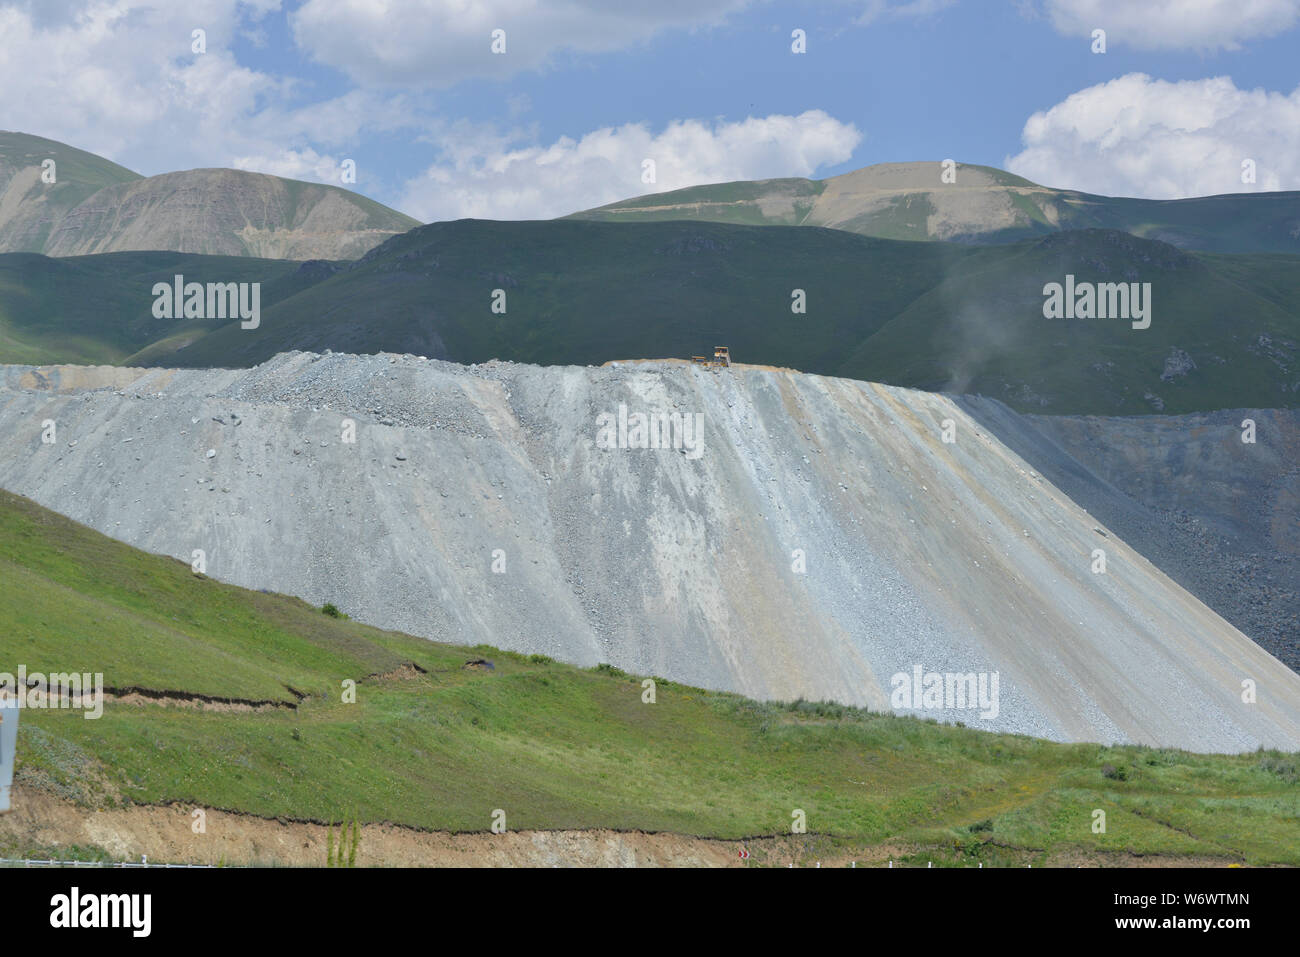 Republic of Armenia. 12th July, 2019. Mining operations and impact in Armenia near the border with the Artsakh Republic have caused serious concerns about environmental impacts from mining gold and other minerals. Residents in some areas have blocked mining operations by occupying some sites. Leakage from tailing dams may pollute Lake Sevan and even the Ararat Valley where agricultural irrigation water from the lake may contaminate farms. Credit: Kenneth Martin/ZUMA Wire/Alamy Live News Stock Photo